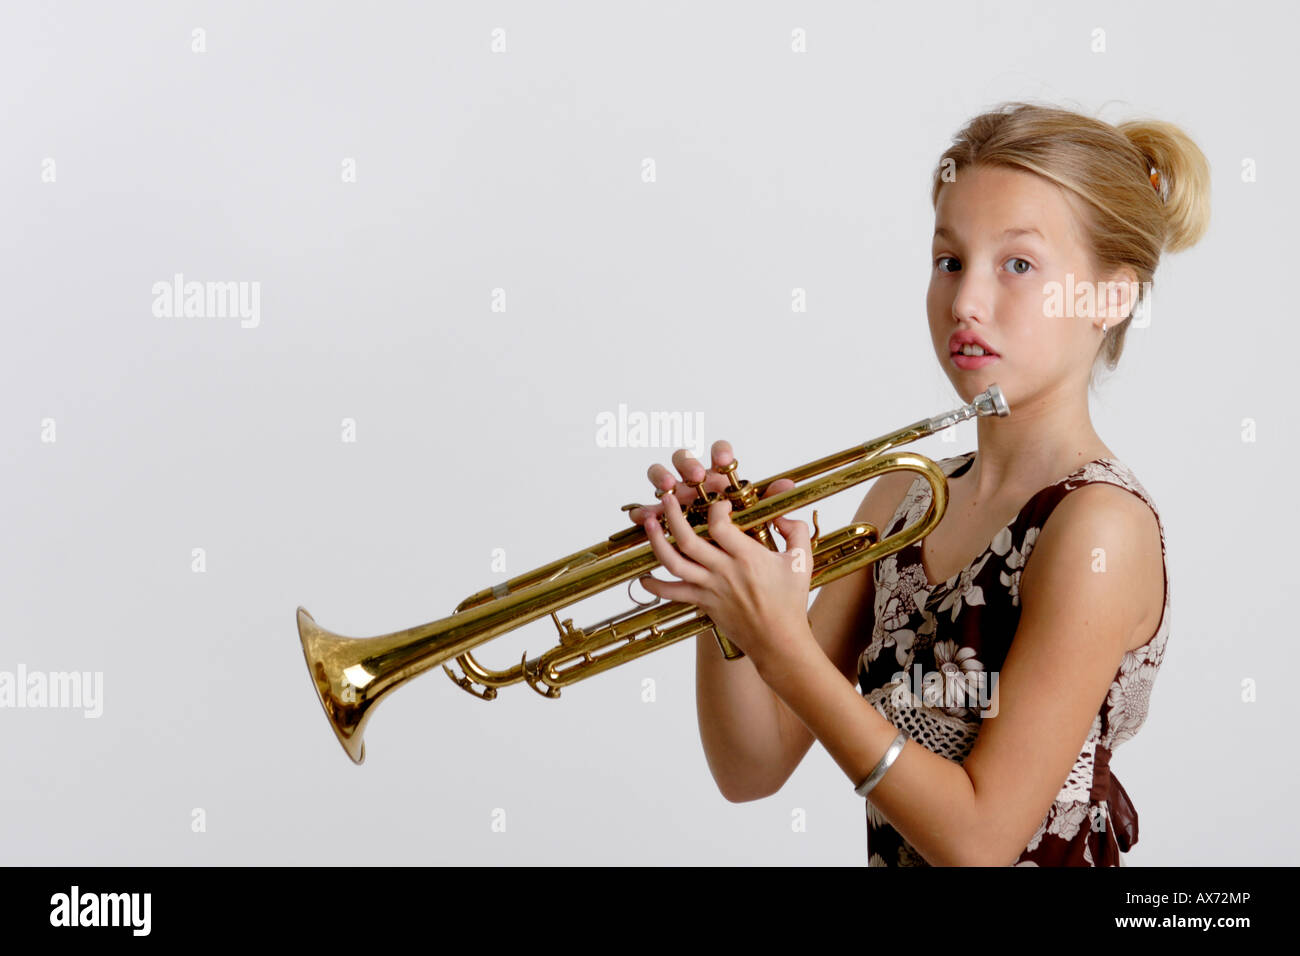 Stock Photograph of a young girl playing the trumpet Stock Photo